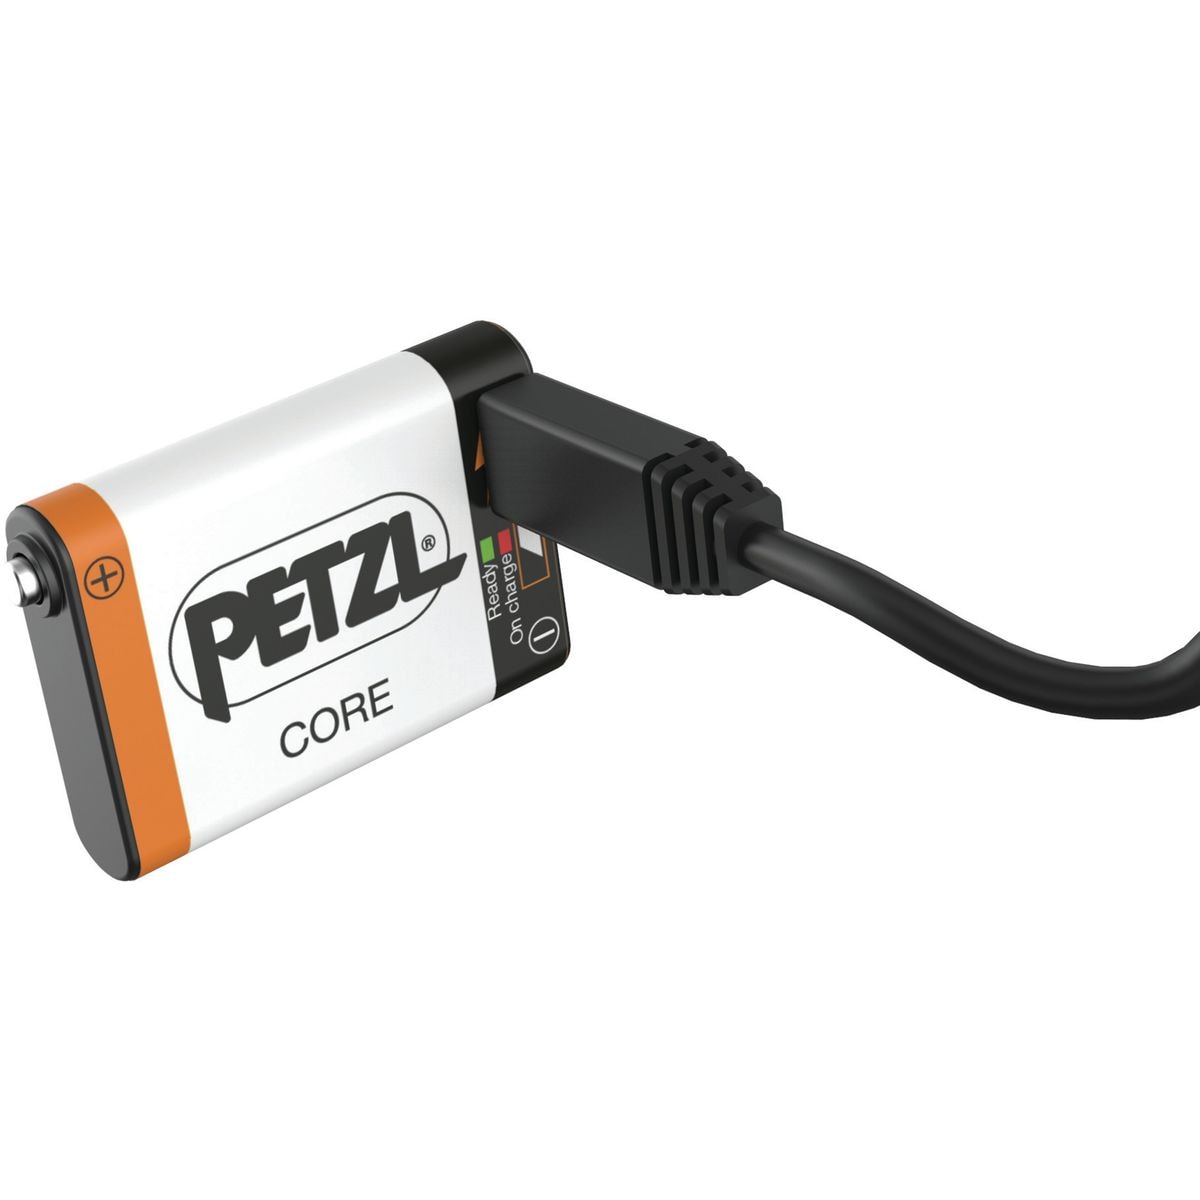 Petzl ACCU CORE - Rechargeable Battery Compatible With Petzl Headlamps